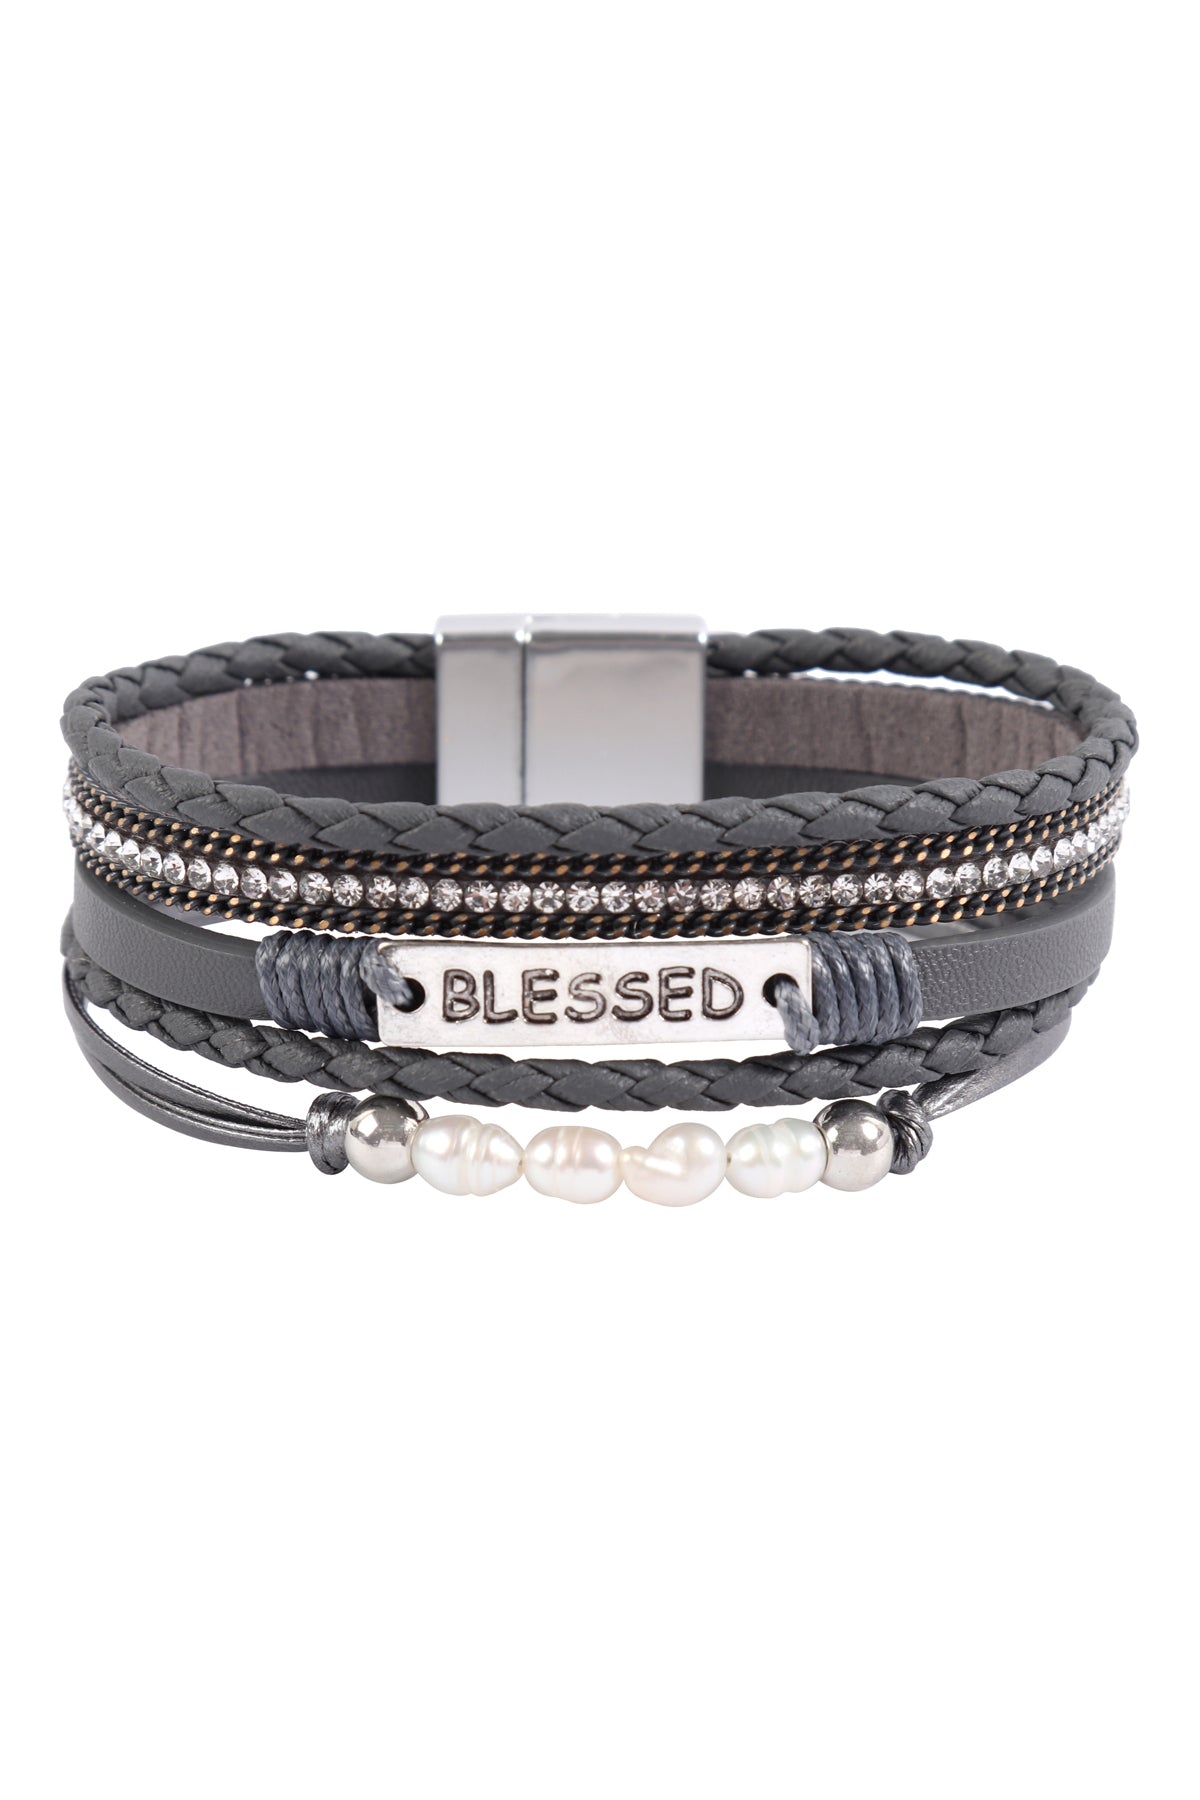 BLESSED MULTI LINE LEATHER WITH MAGNETIC LOCK BRACELET (NOW $1.25 ONLY!)